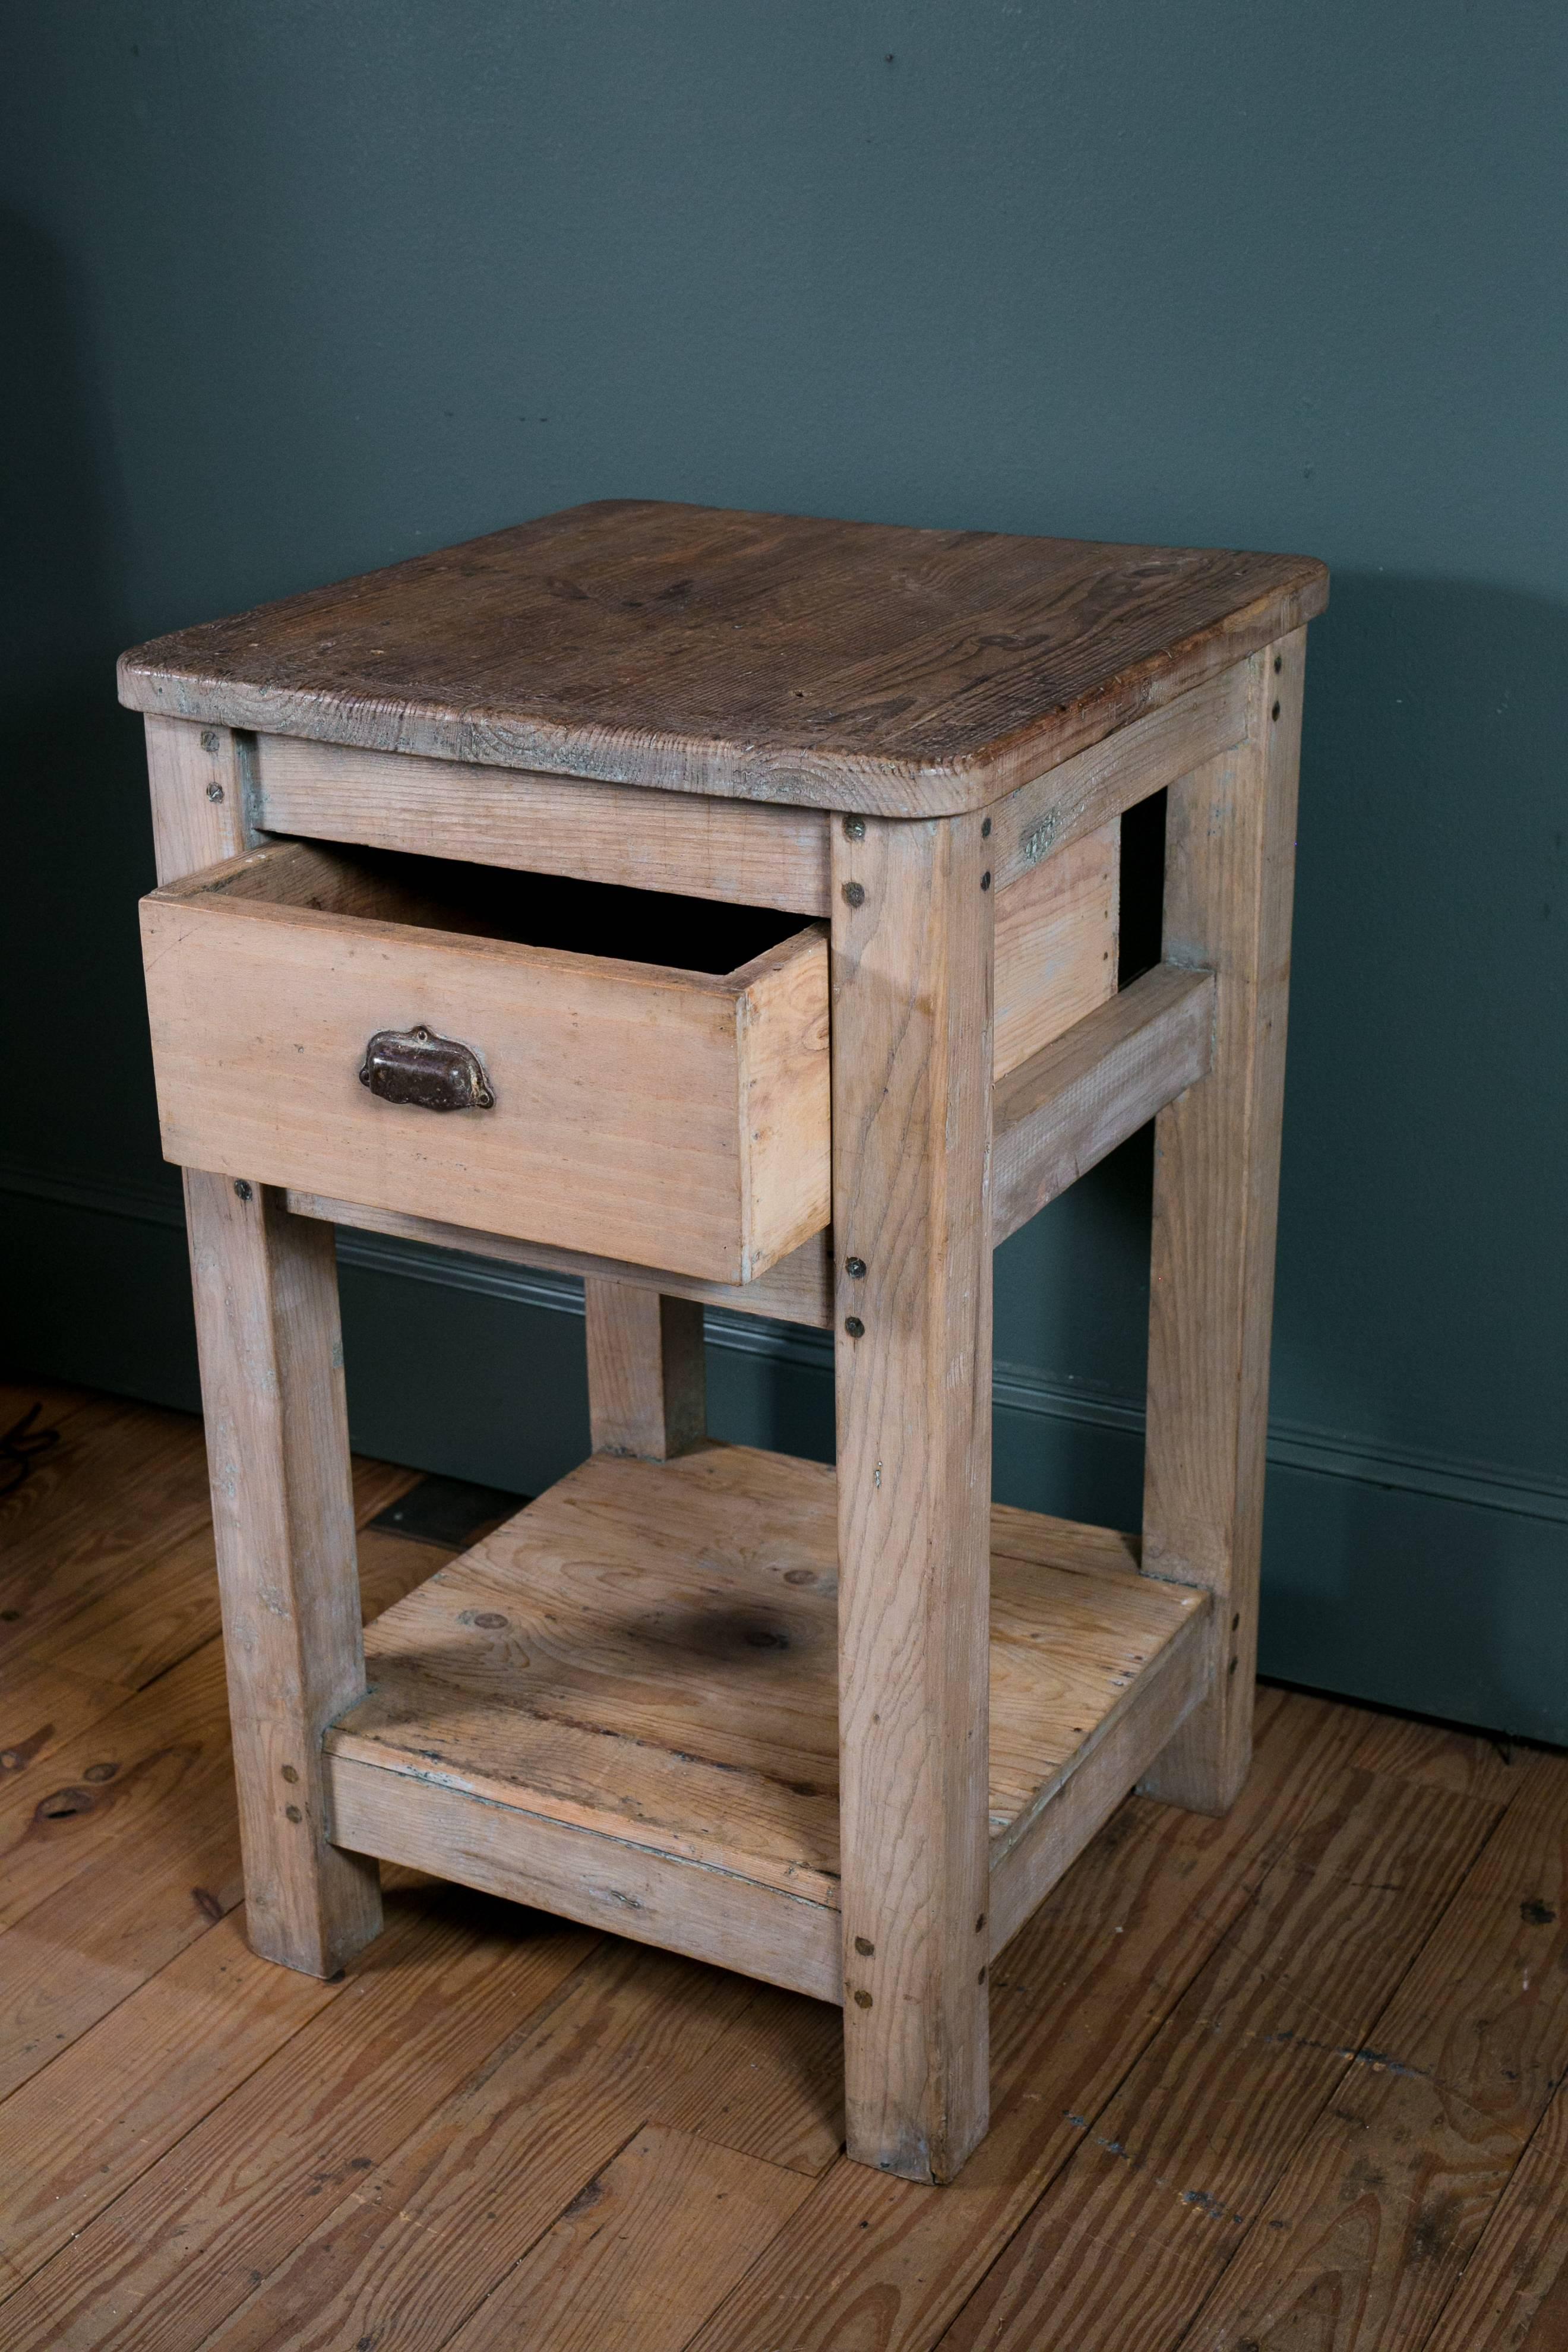 Wooden butcher block with drawer and shelf below for storage.
Original drawer pull.